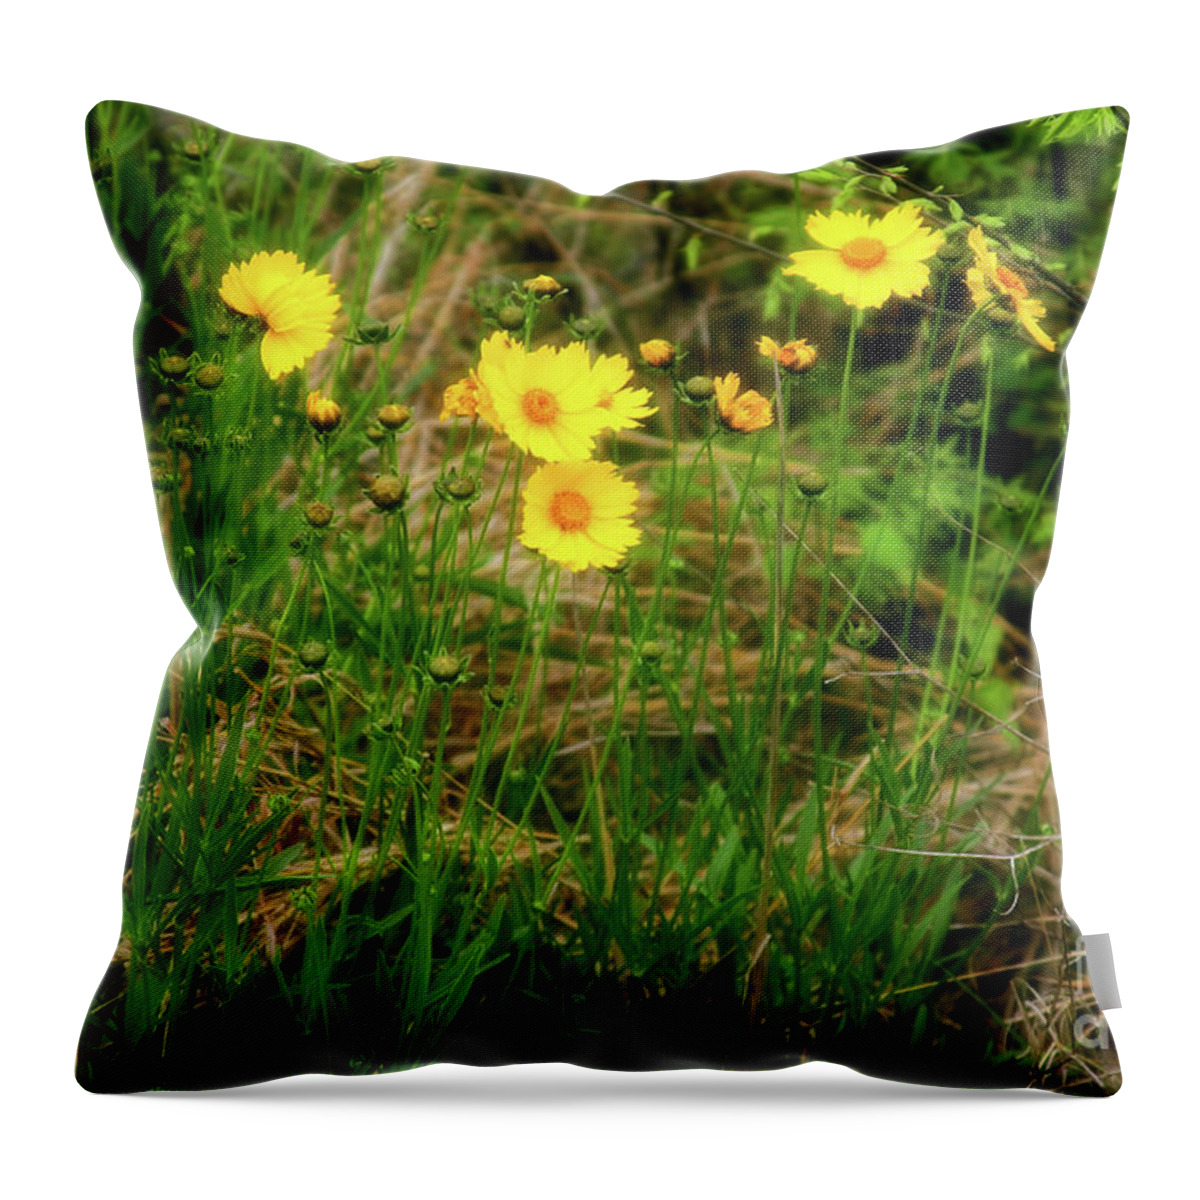 Wild Flowers Throw Pillow featuring the photograph Wild Flowers by Joan Bertucci